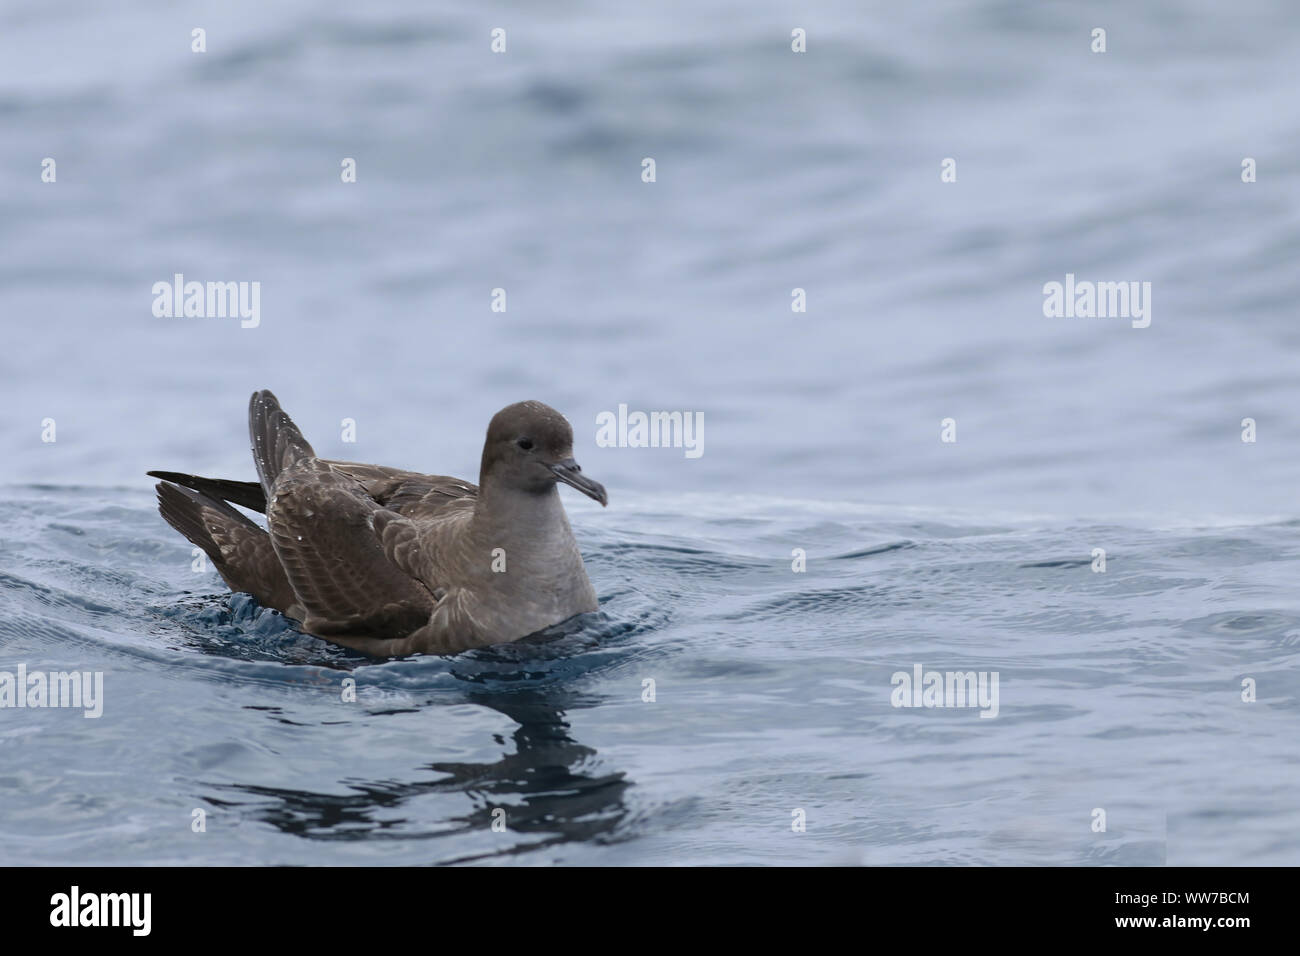 A Short-tailed Shearwater, Puffinus tenuirostris, on water Stock Photo